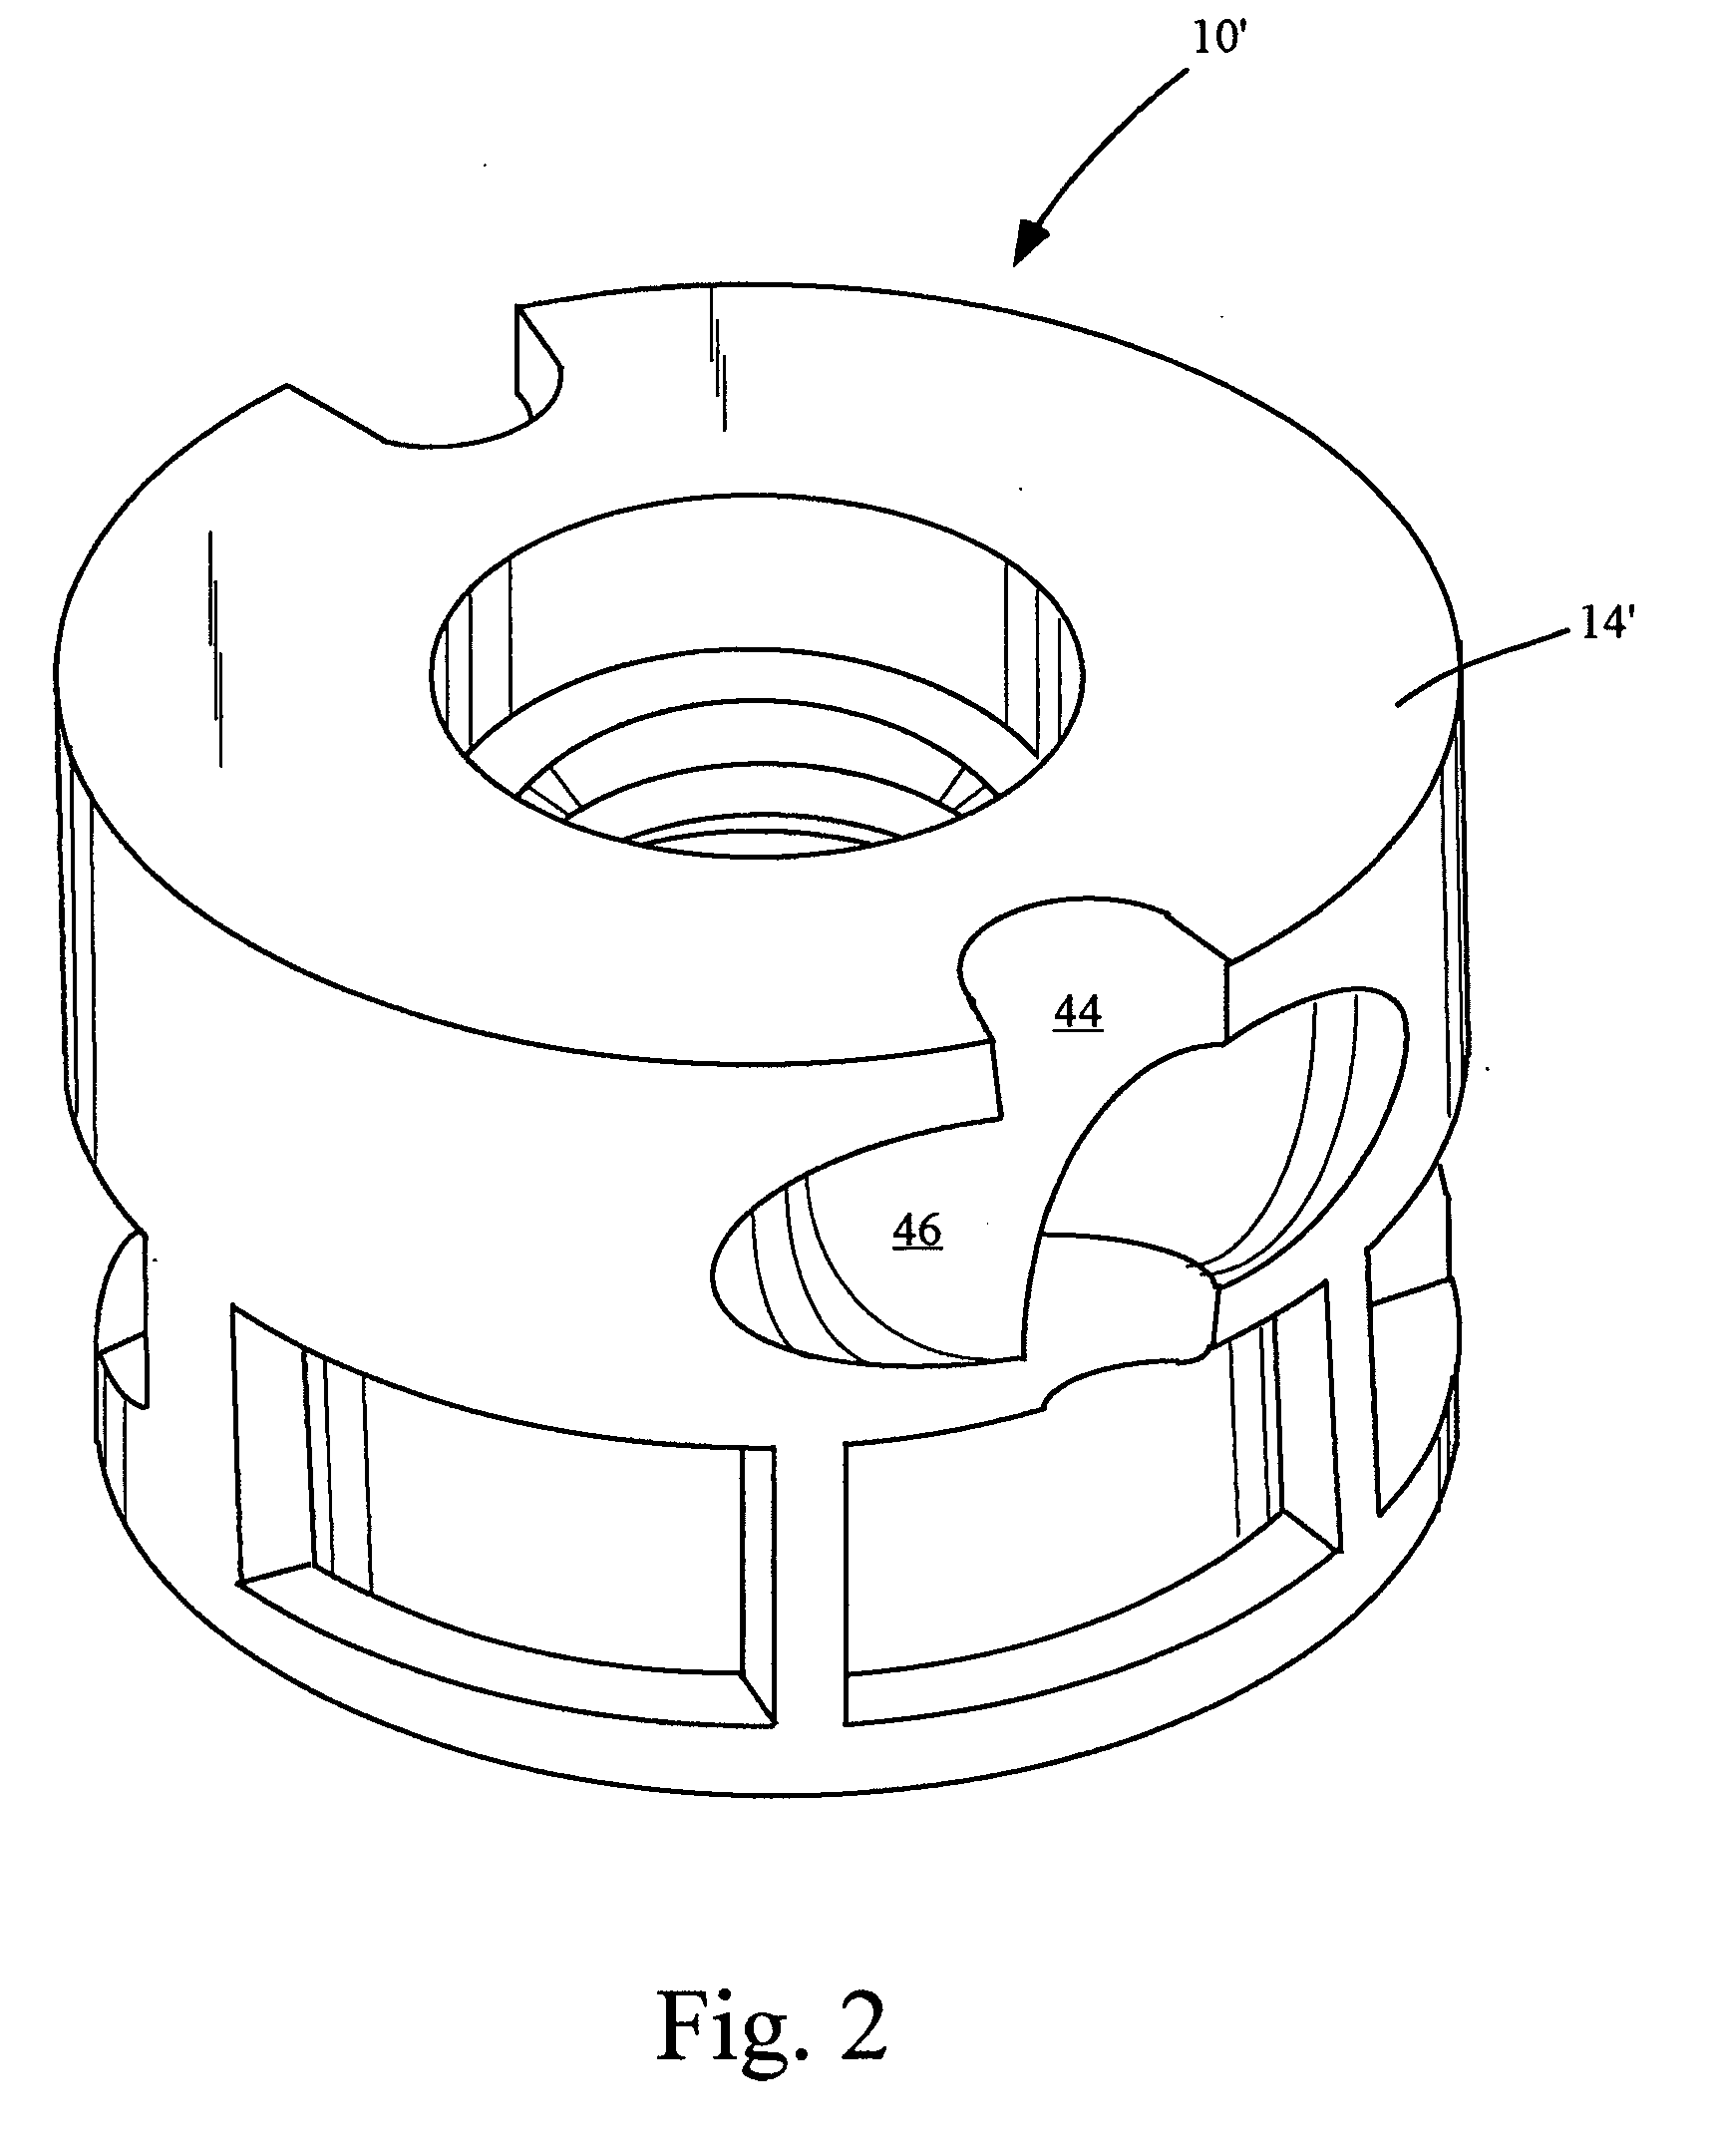 Threaded insert for receiving a threaded fastener in a composite panel